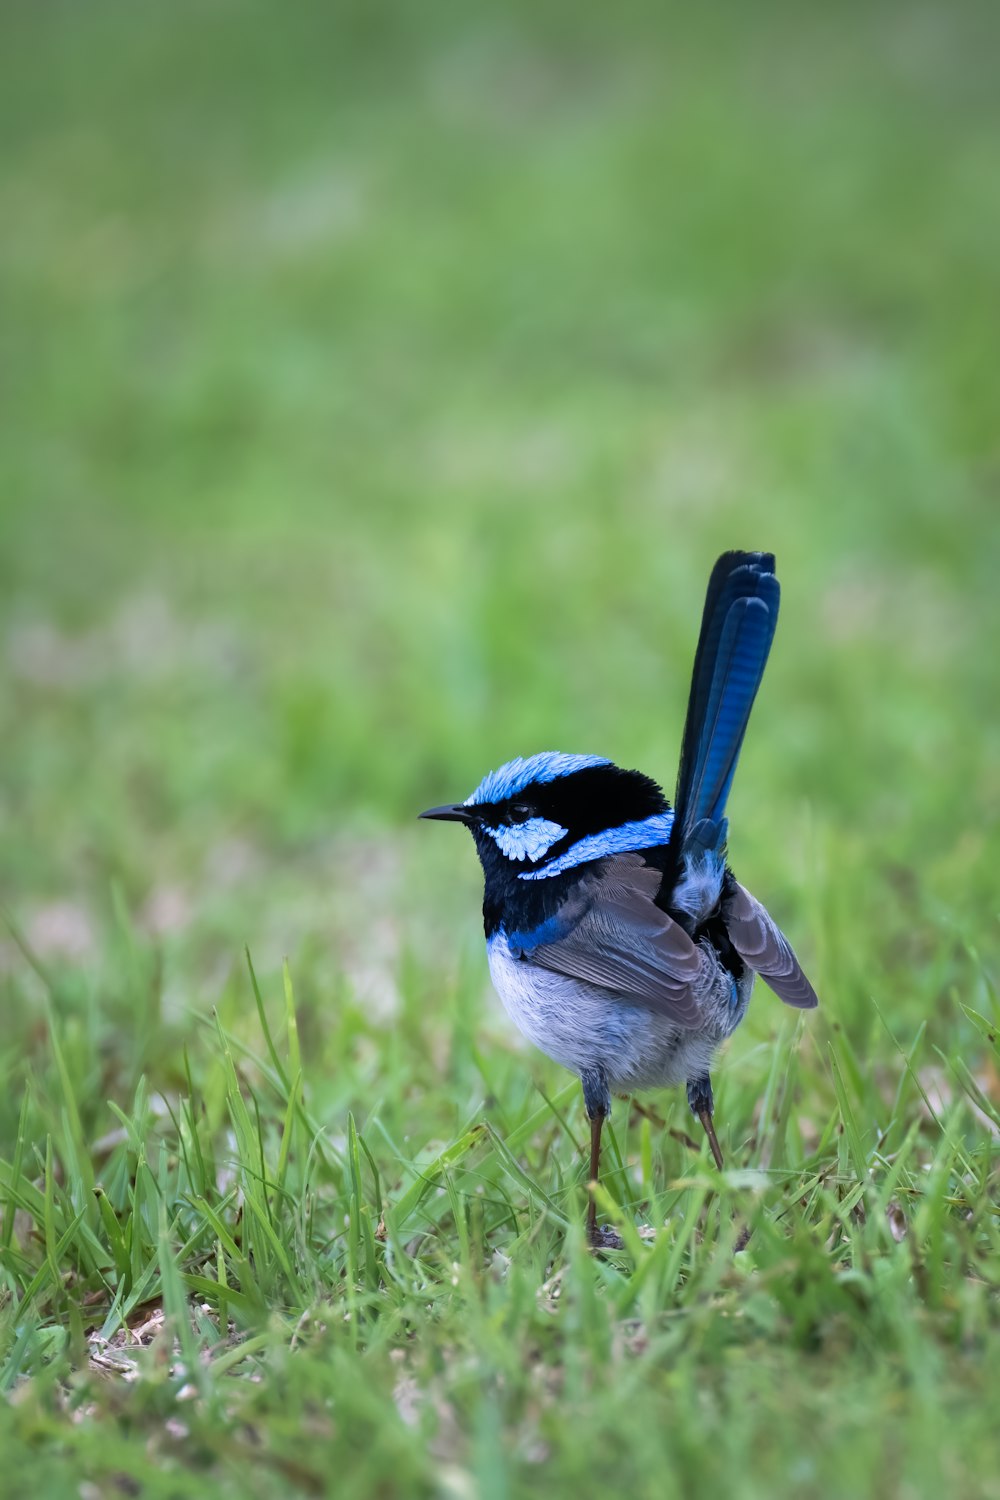 a small blue and black bird standing in the grass